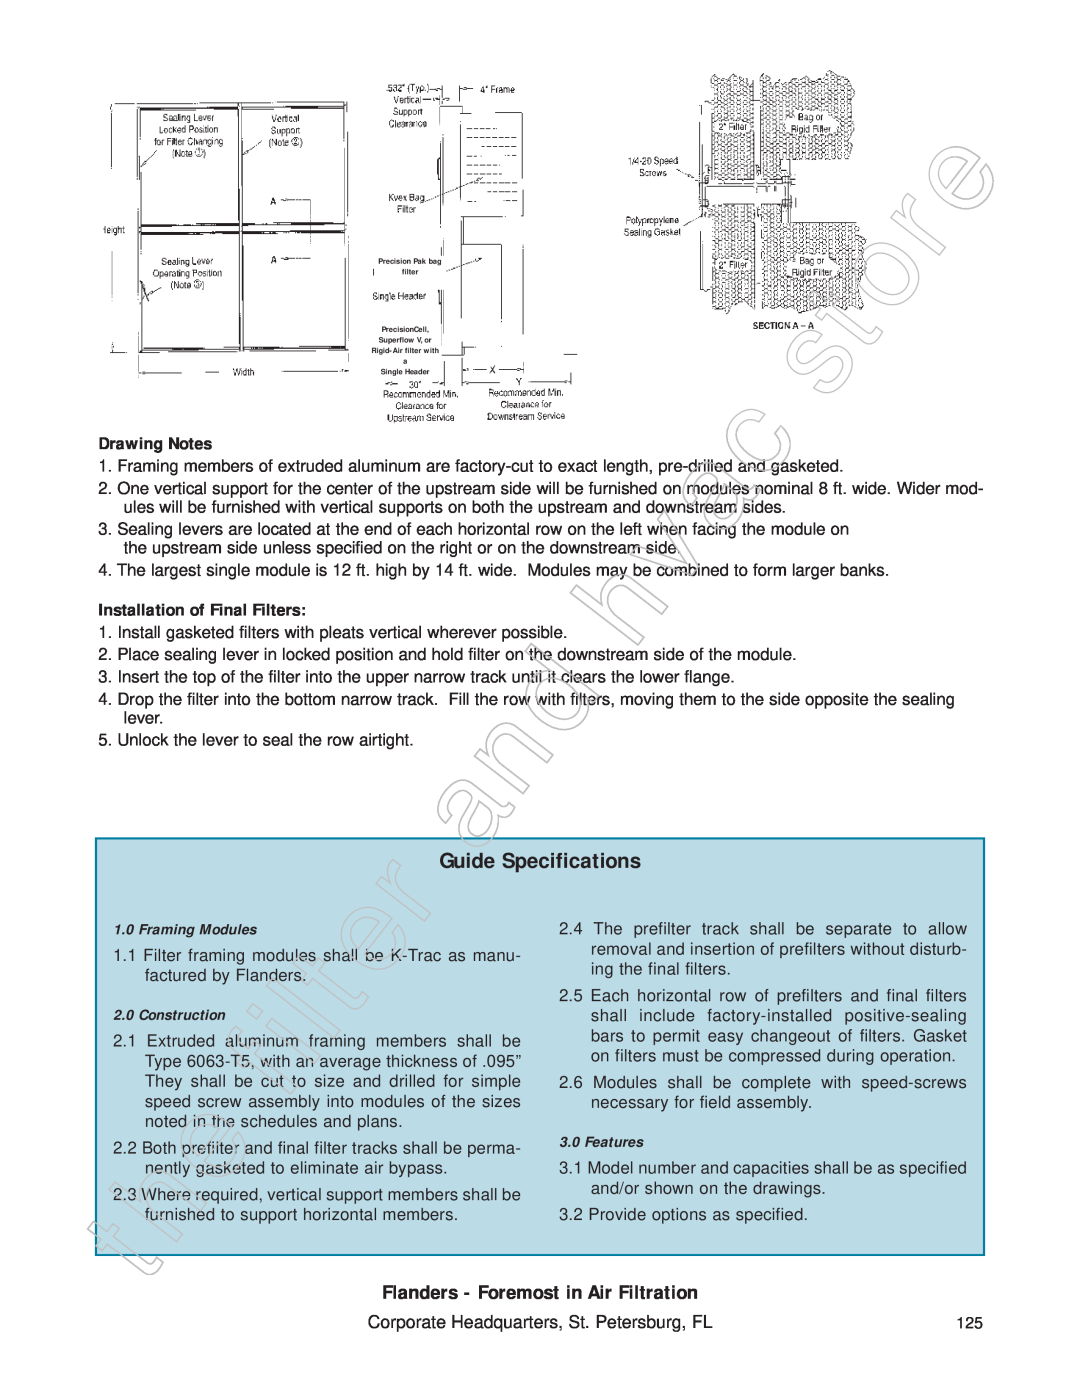 Honeywell 11255 manual Guide Specifications, Drawing Notes, Installation of Final Filters, Framing Modules, Features 